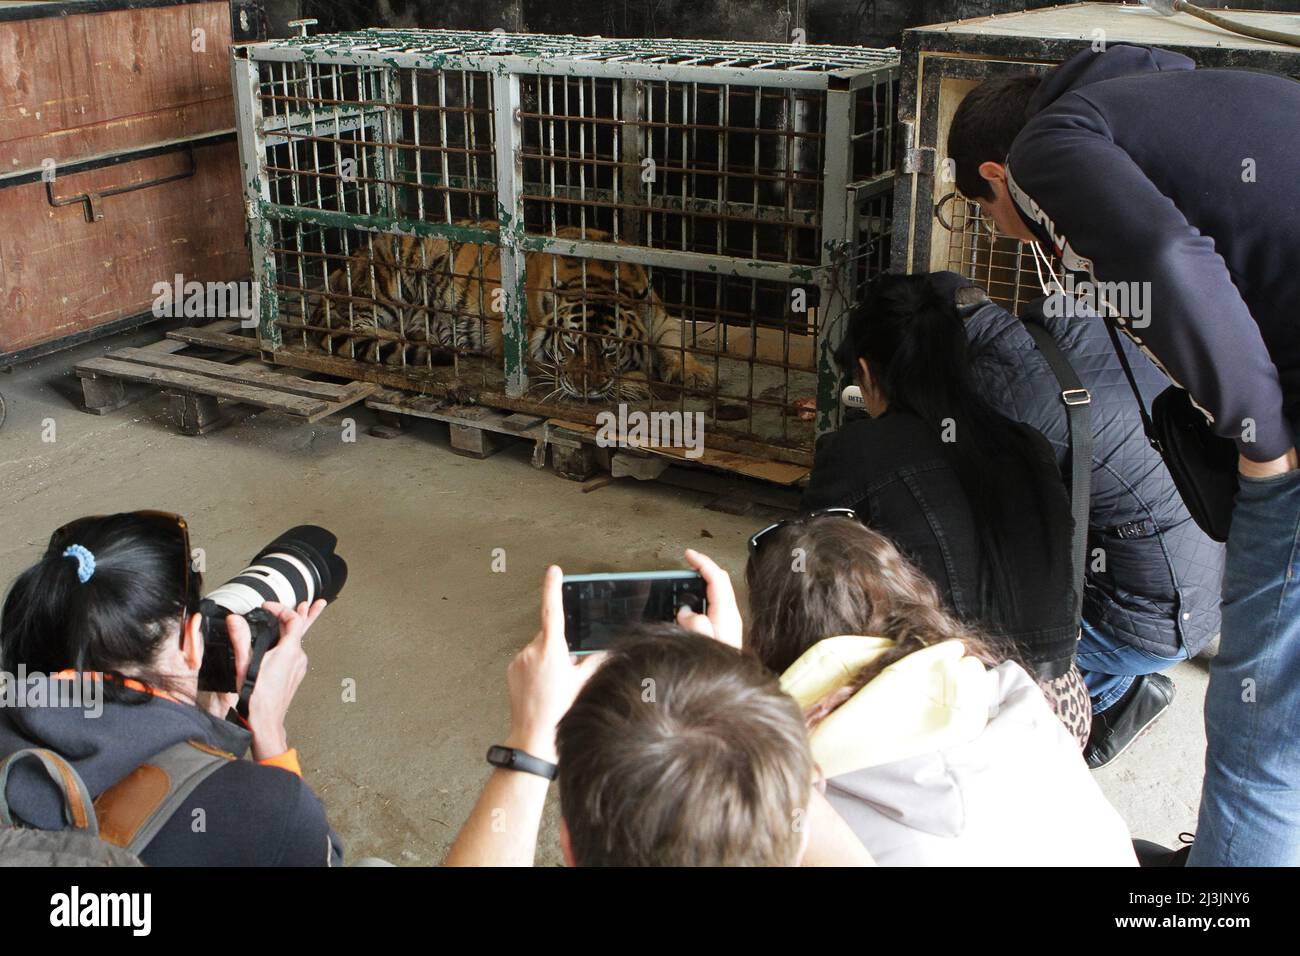 DNIPRO, UKRAINE - APRIL 8, 2022 - Journalists take pictures of a tiger evacuated from the ruined Kharkiv Feldman Ecopark, Dnipro, central Ukraine. Stock Photo